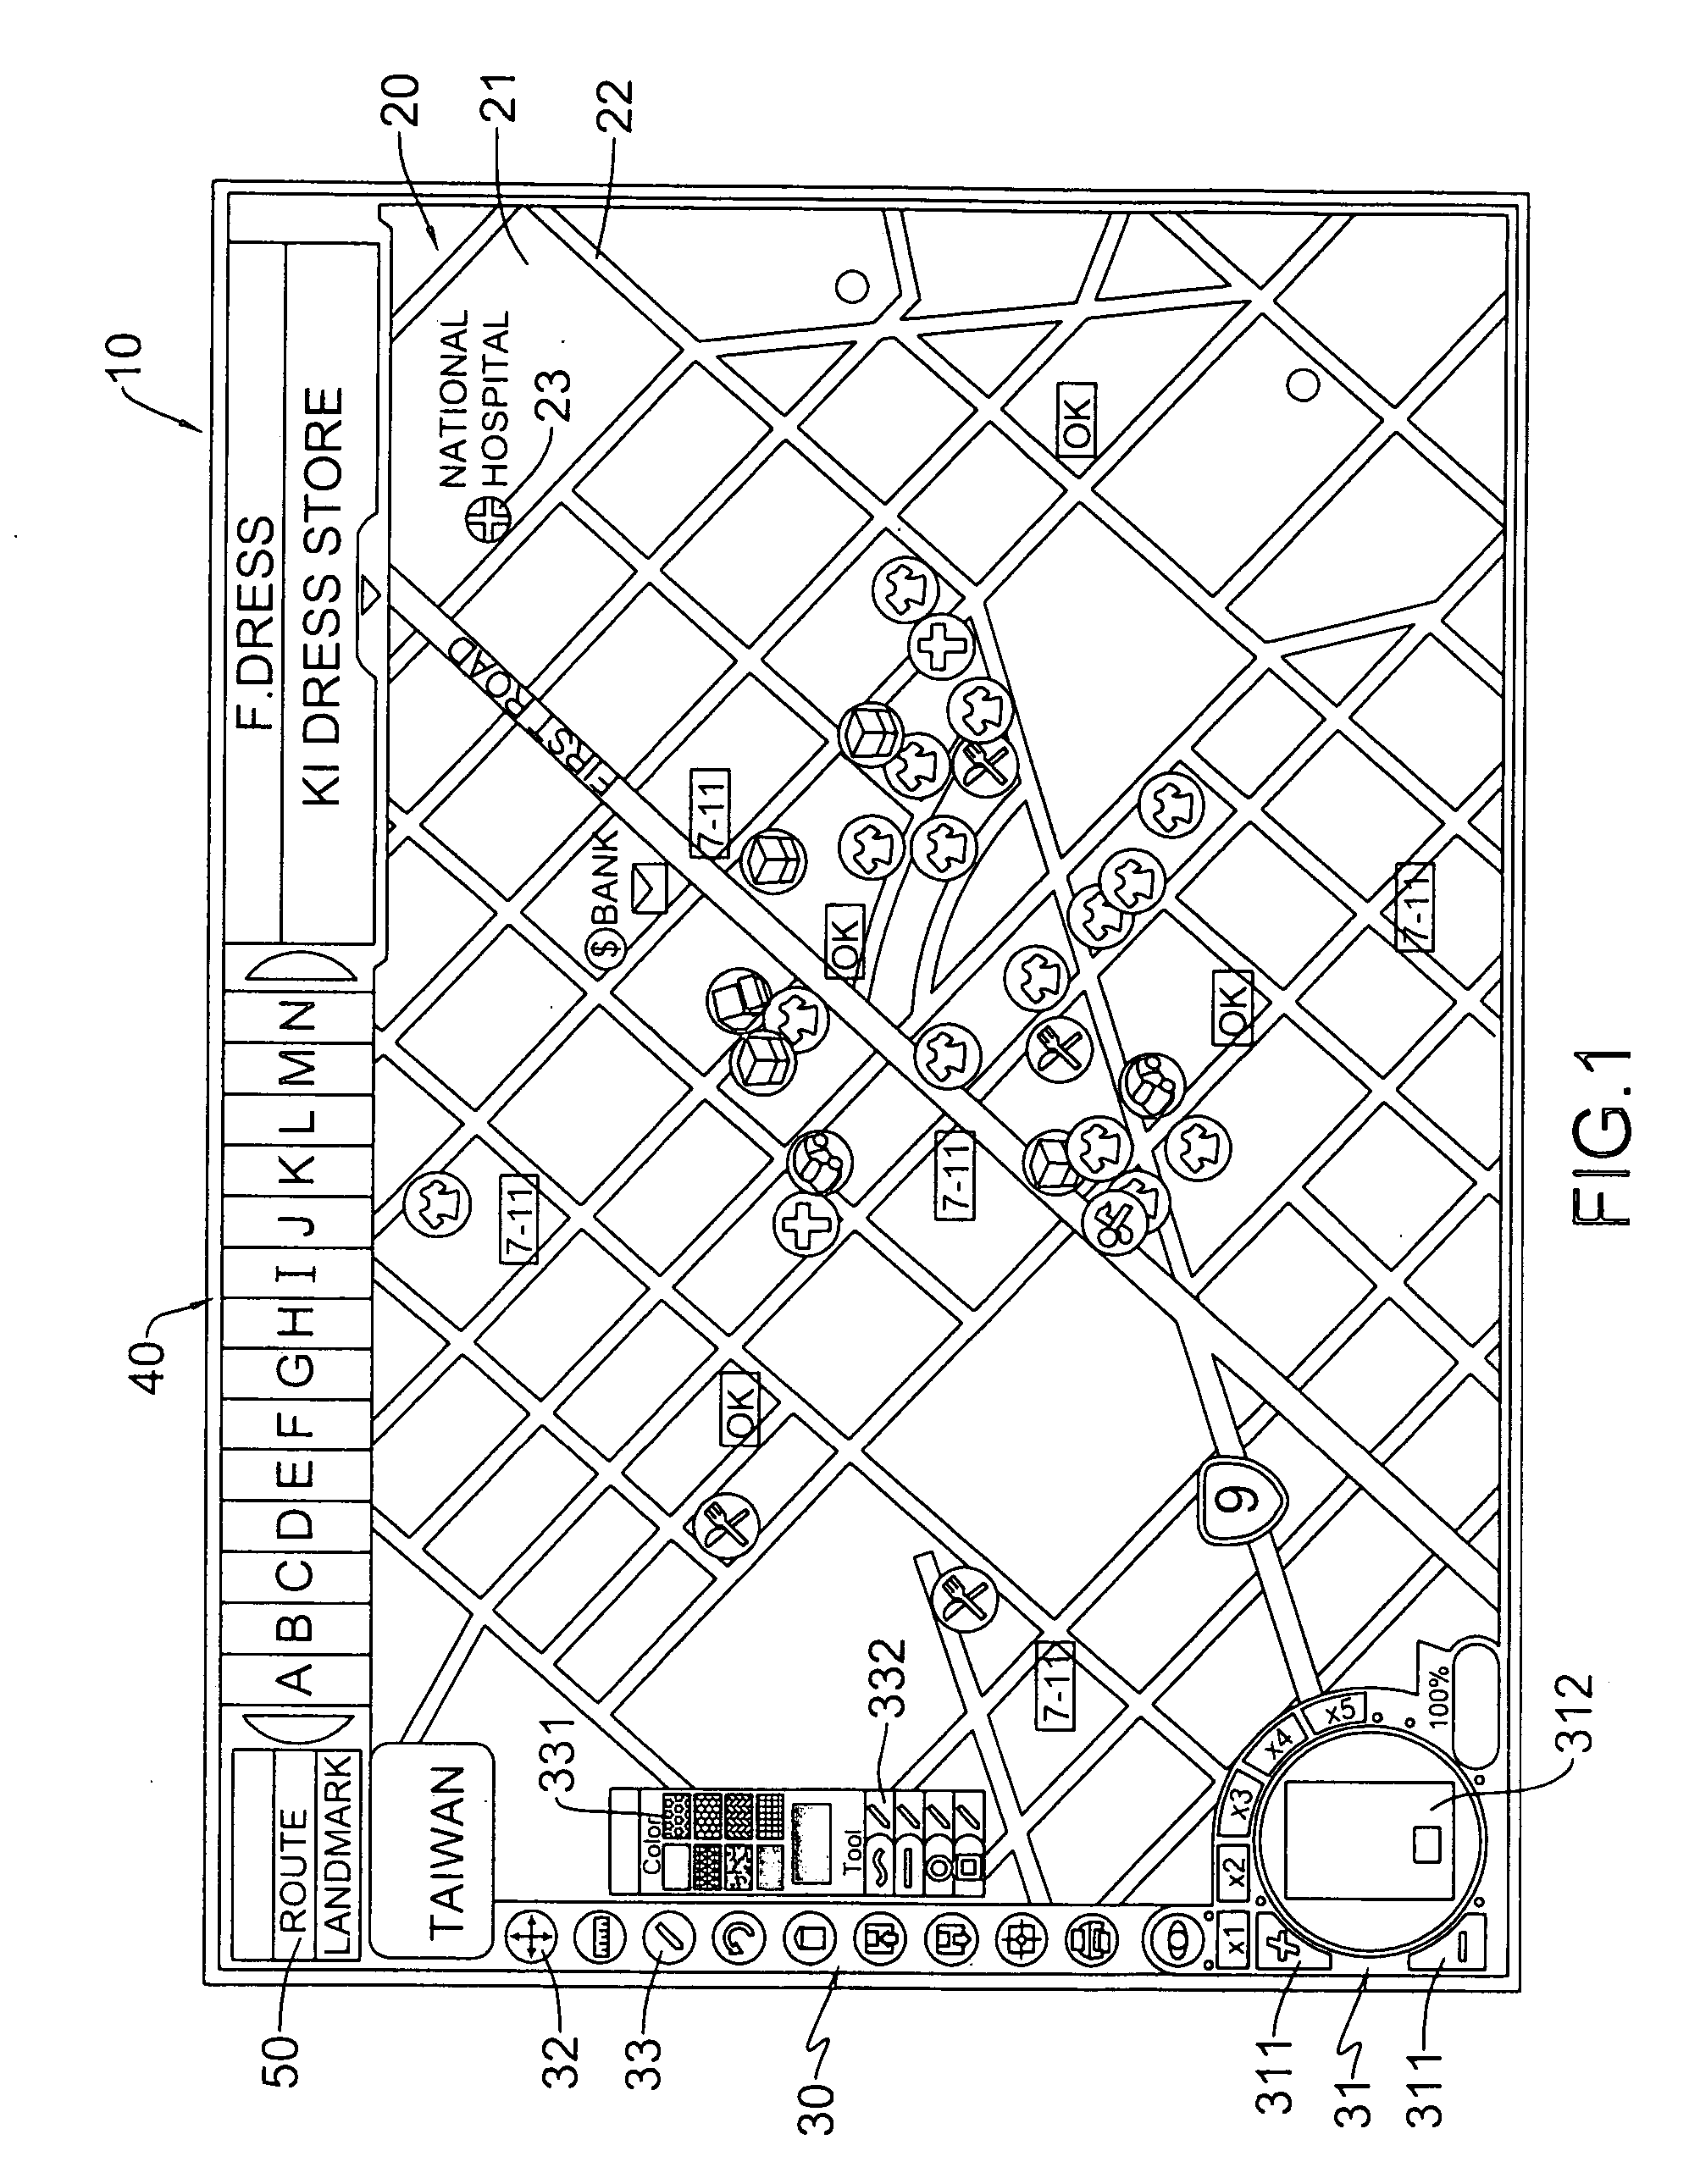 Electronic map with a drawing feature